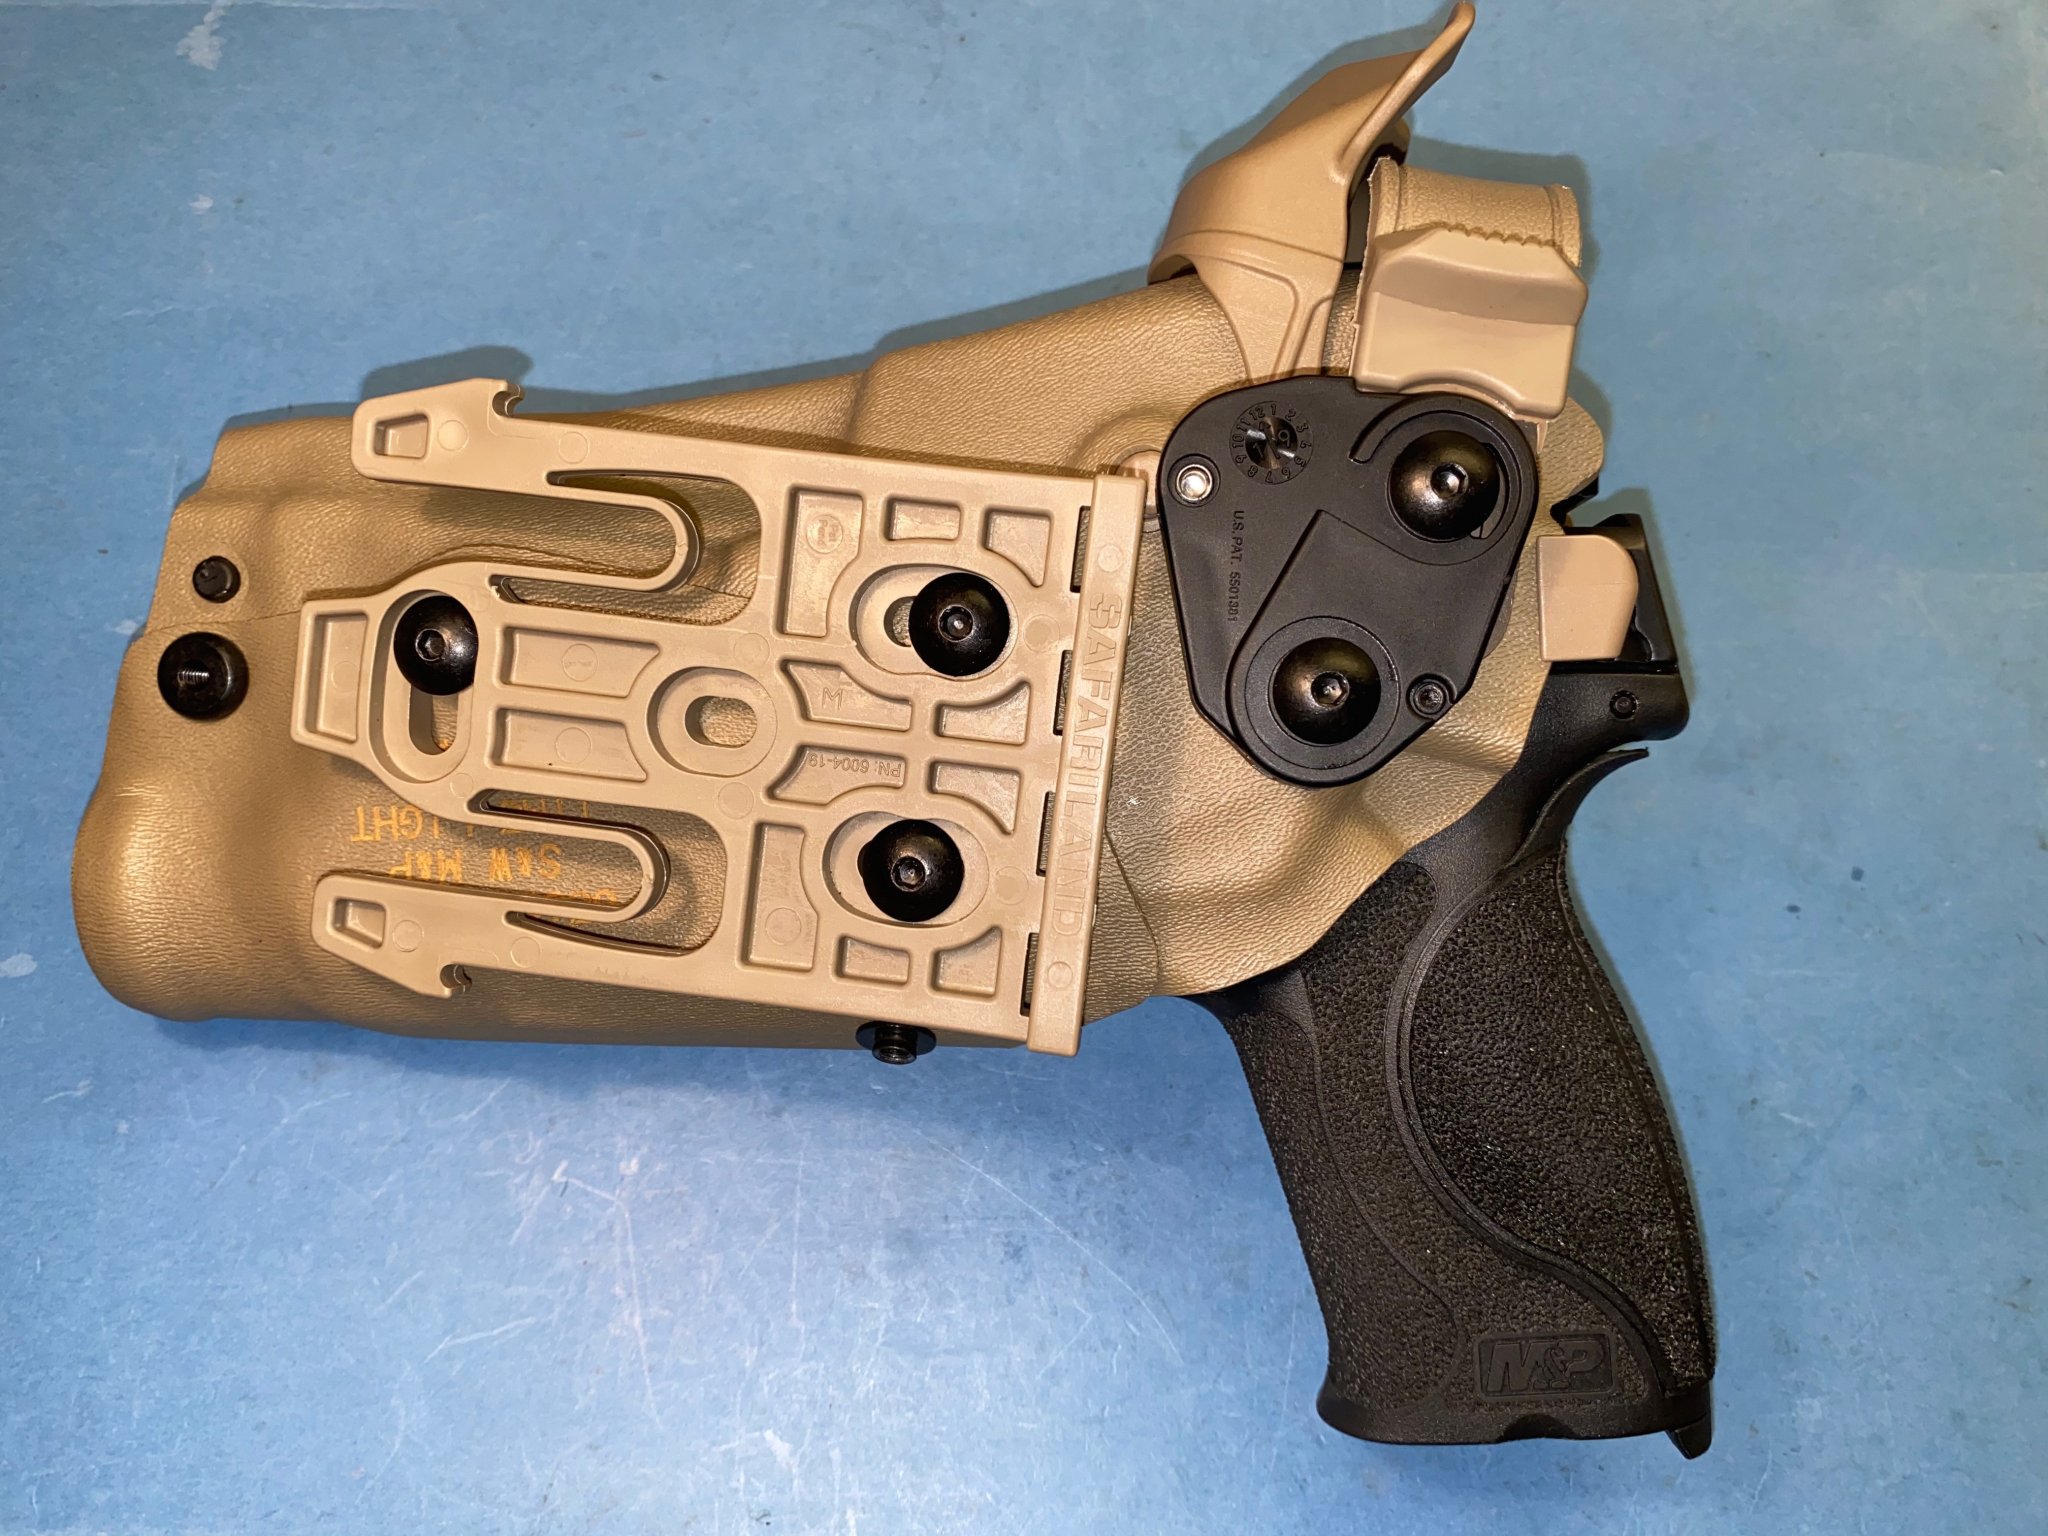 Smith & Wesson M&P9 2.0 PC Safariland RDS Thermolaminate Holster Level 3IMG_6788 copy.JPG